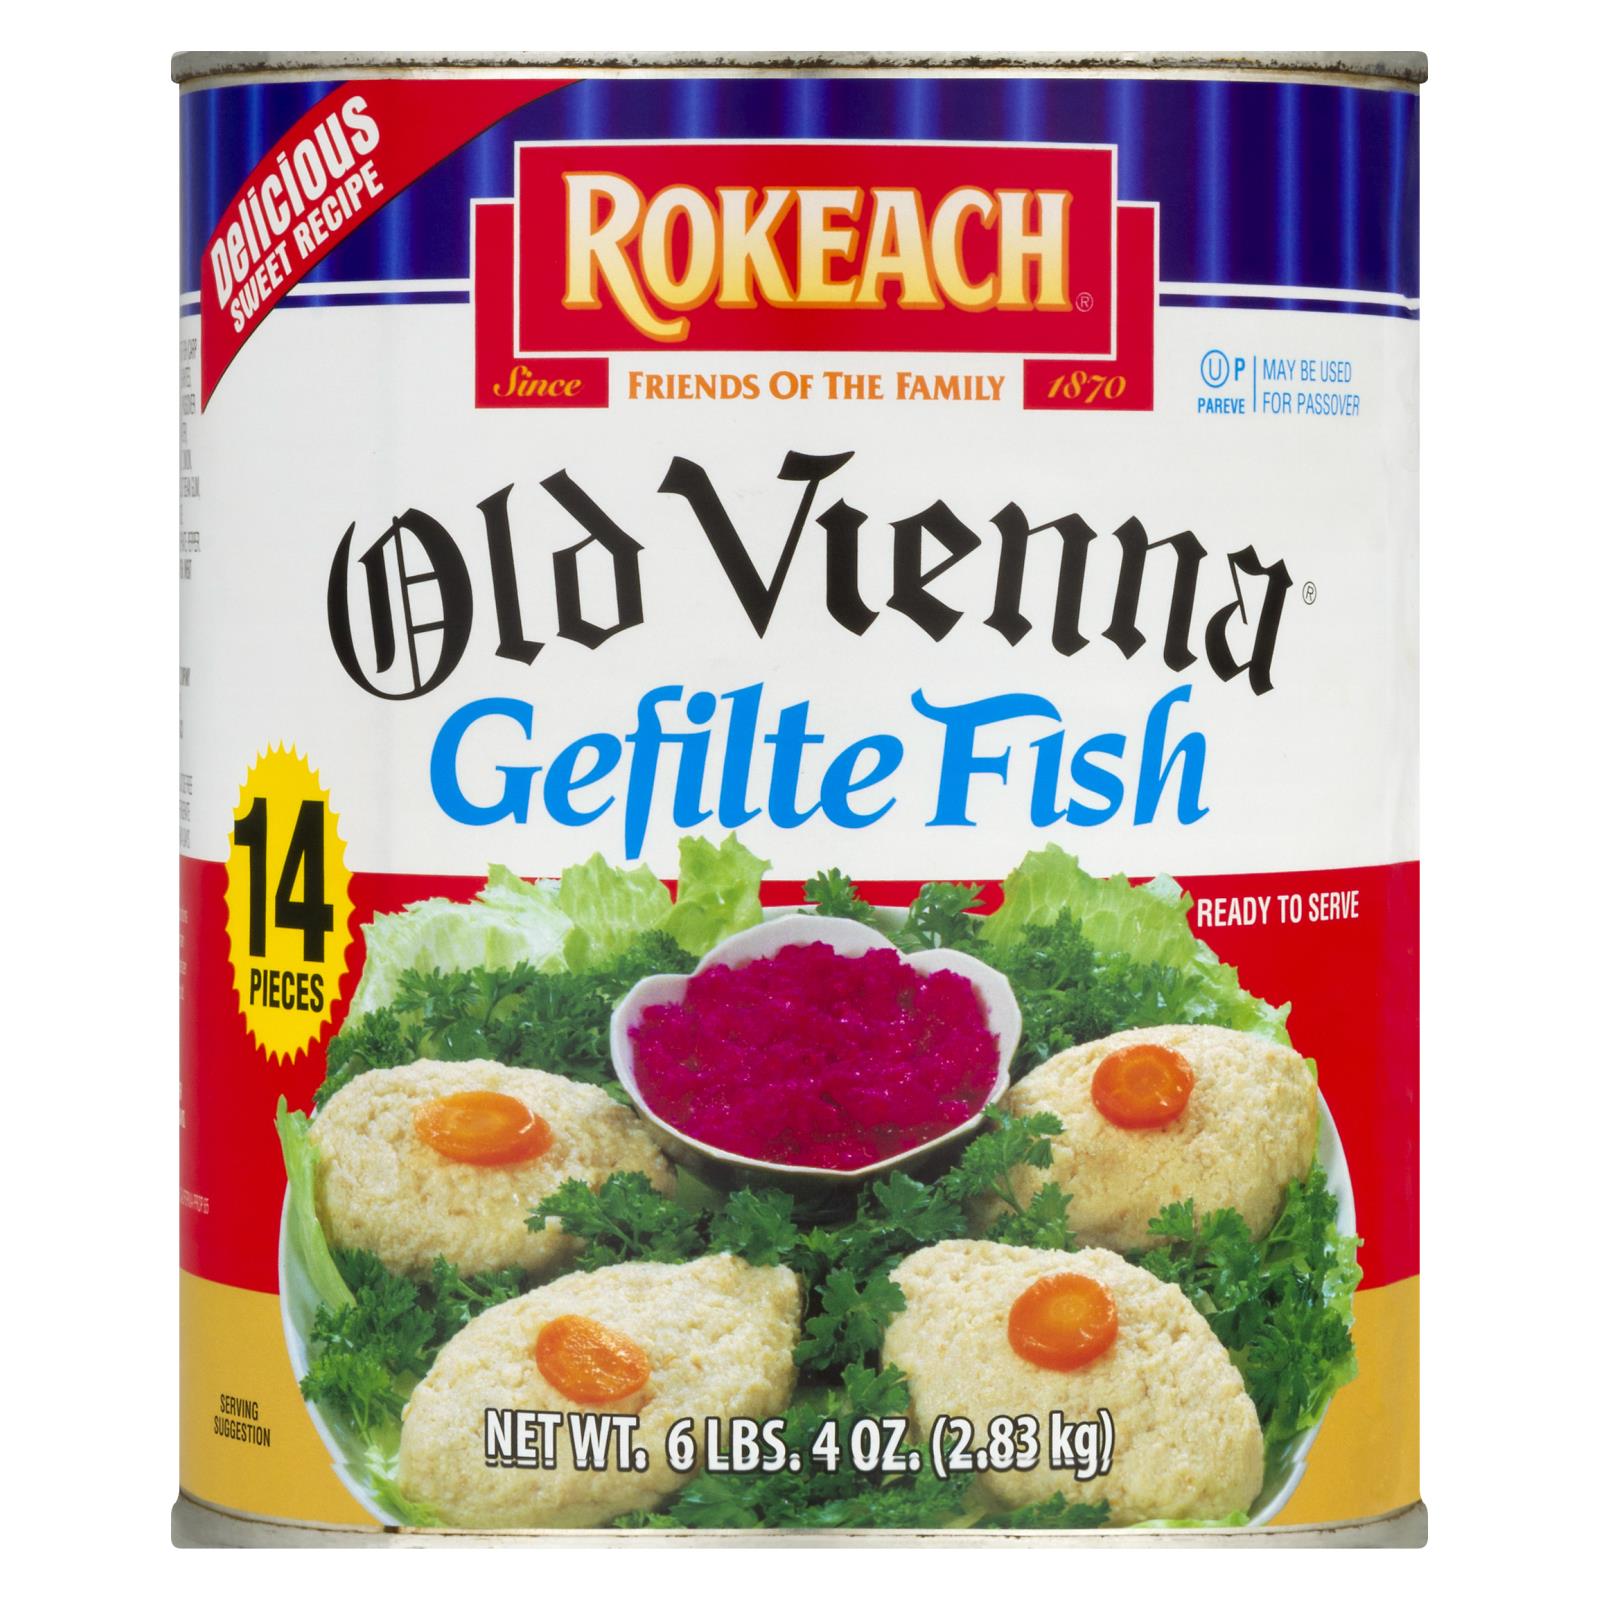 Rokeach, Rokeach - Fish Old Vienna 14pc - Case of 6-100 OZ (Pack of 6)